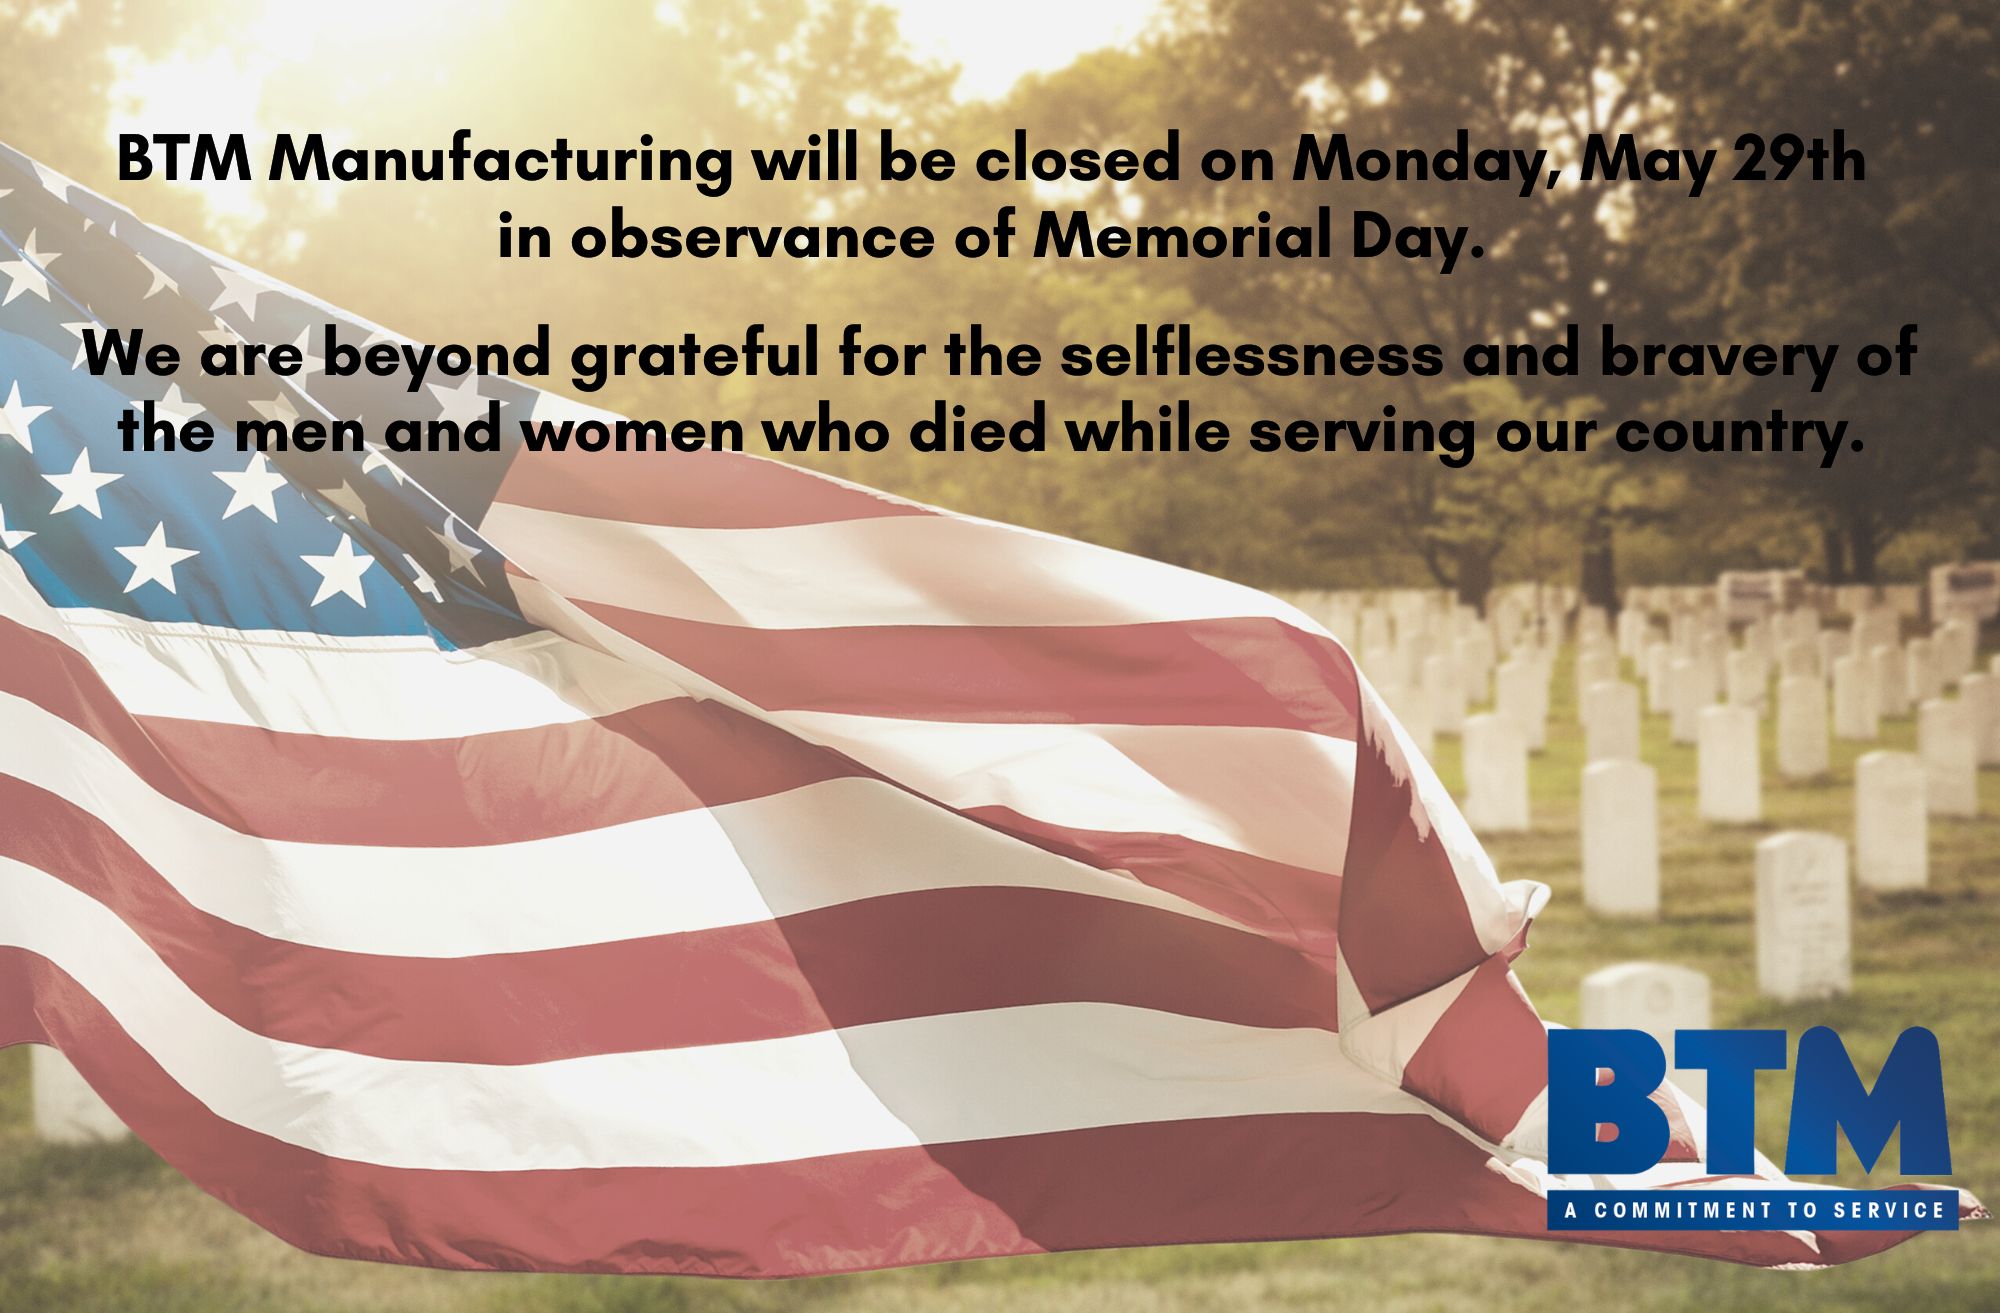 BTM Manufacturing Closed on Memorial Day